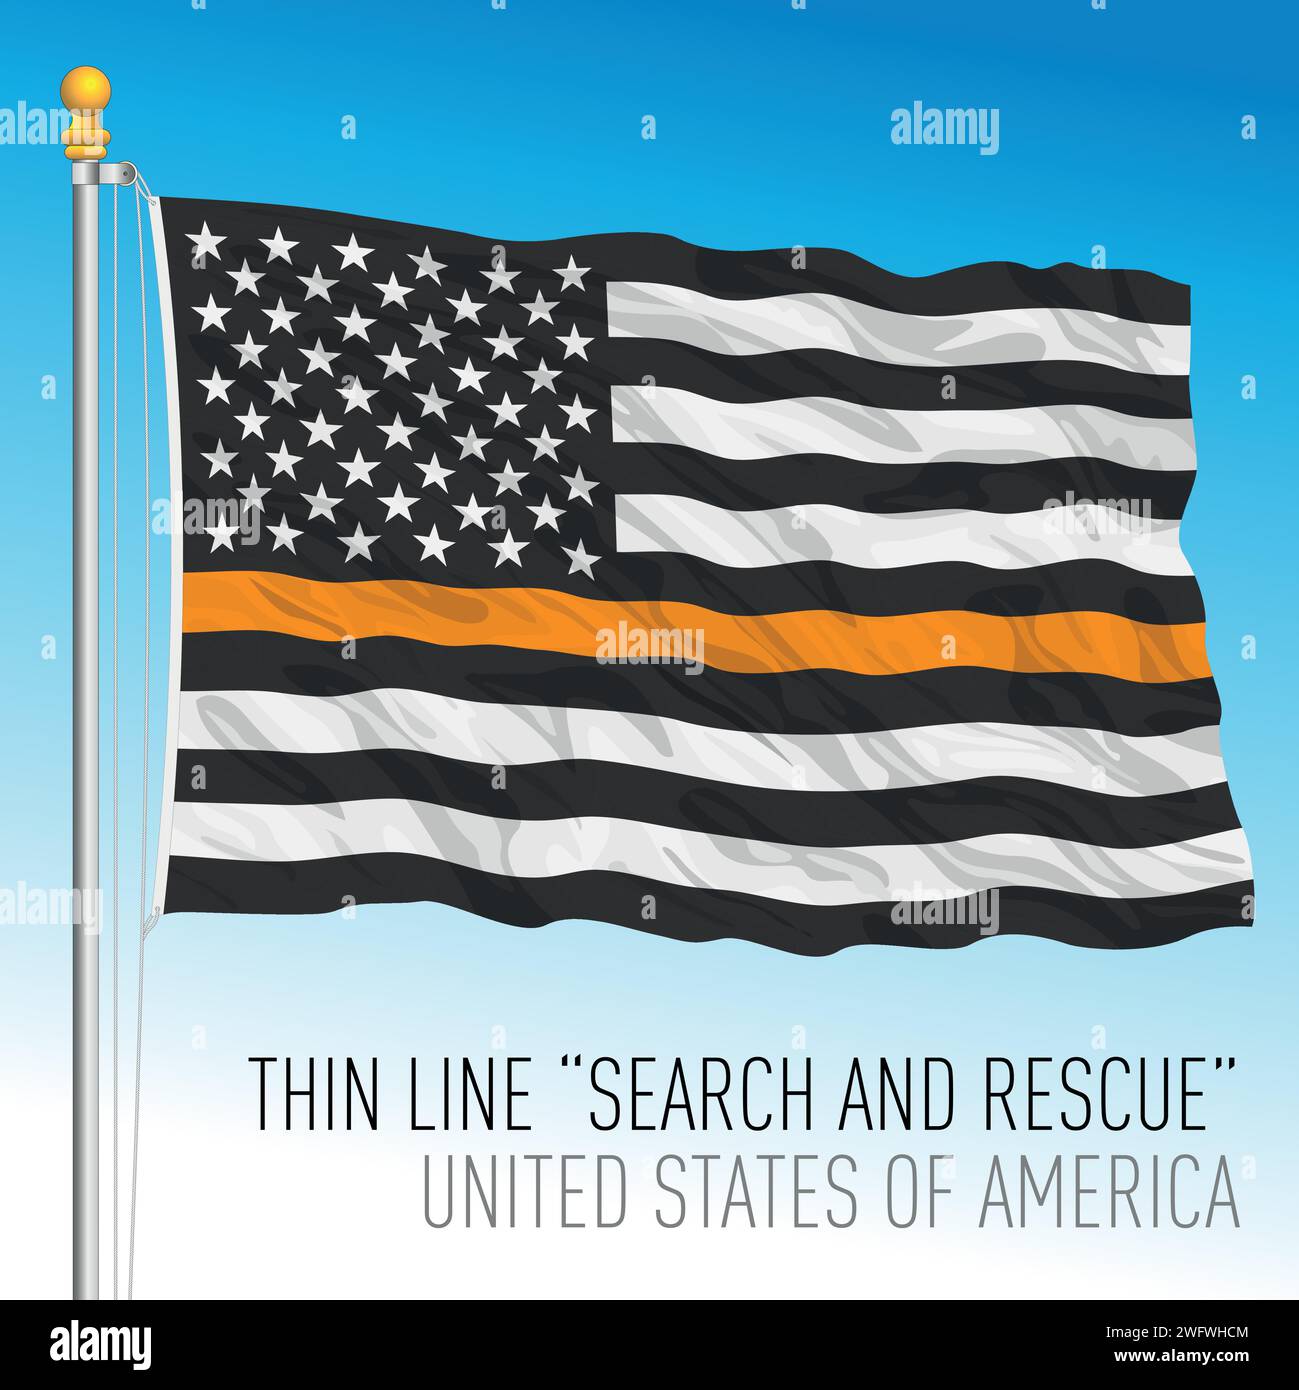 USA, thin line orange waving flag, search and rescue symbol, United States, vector illustration Stock Vector